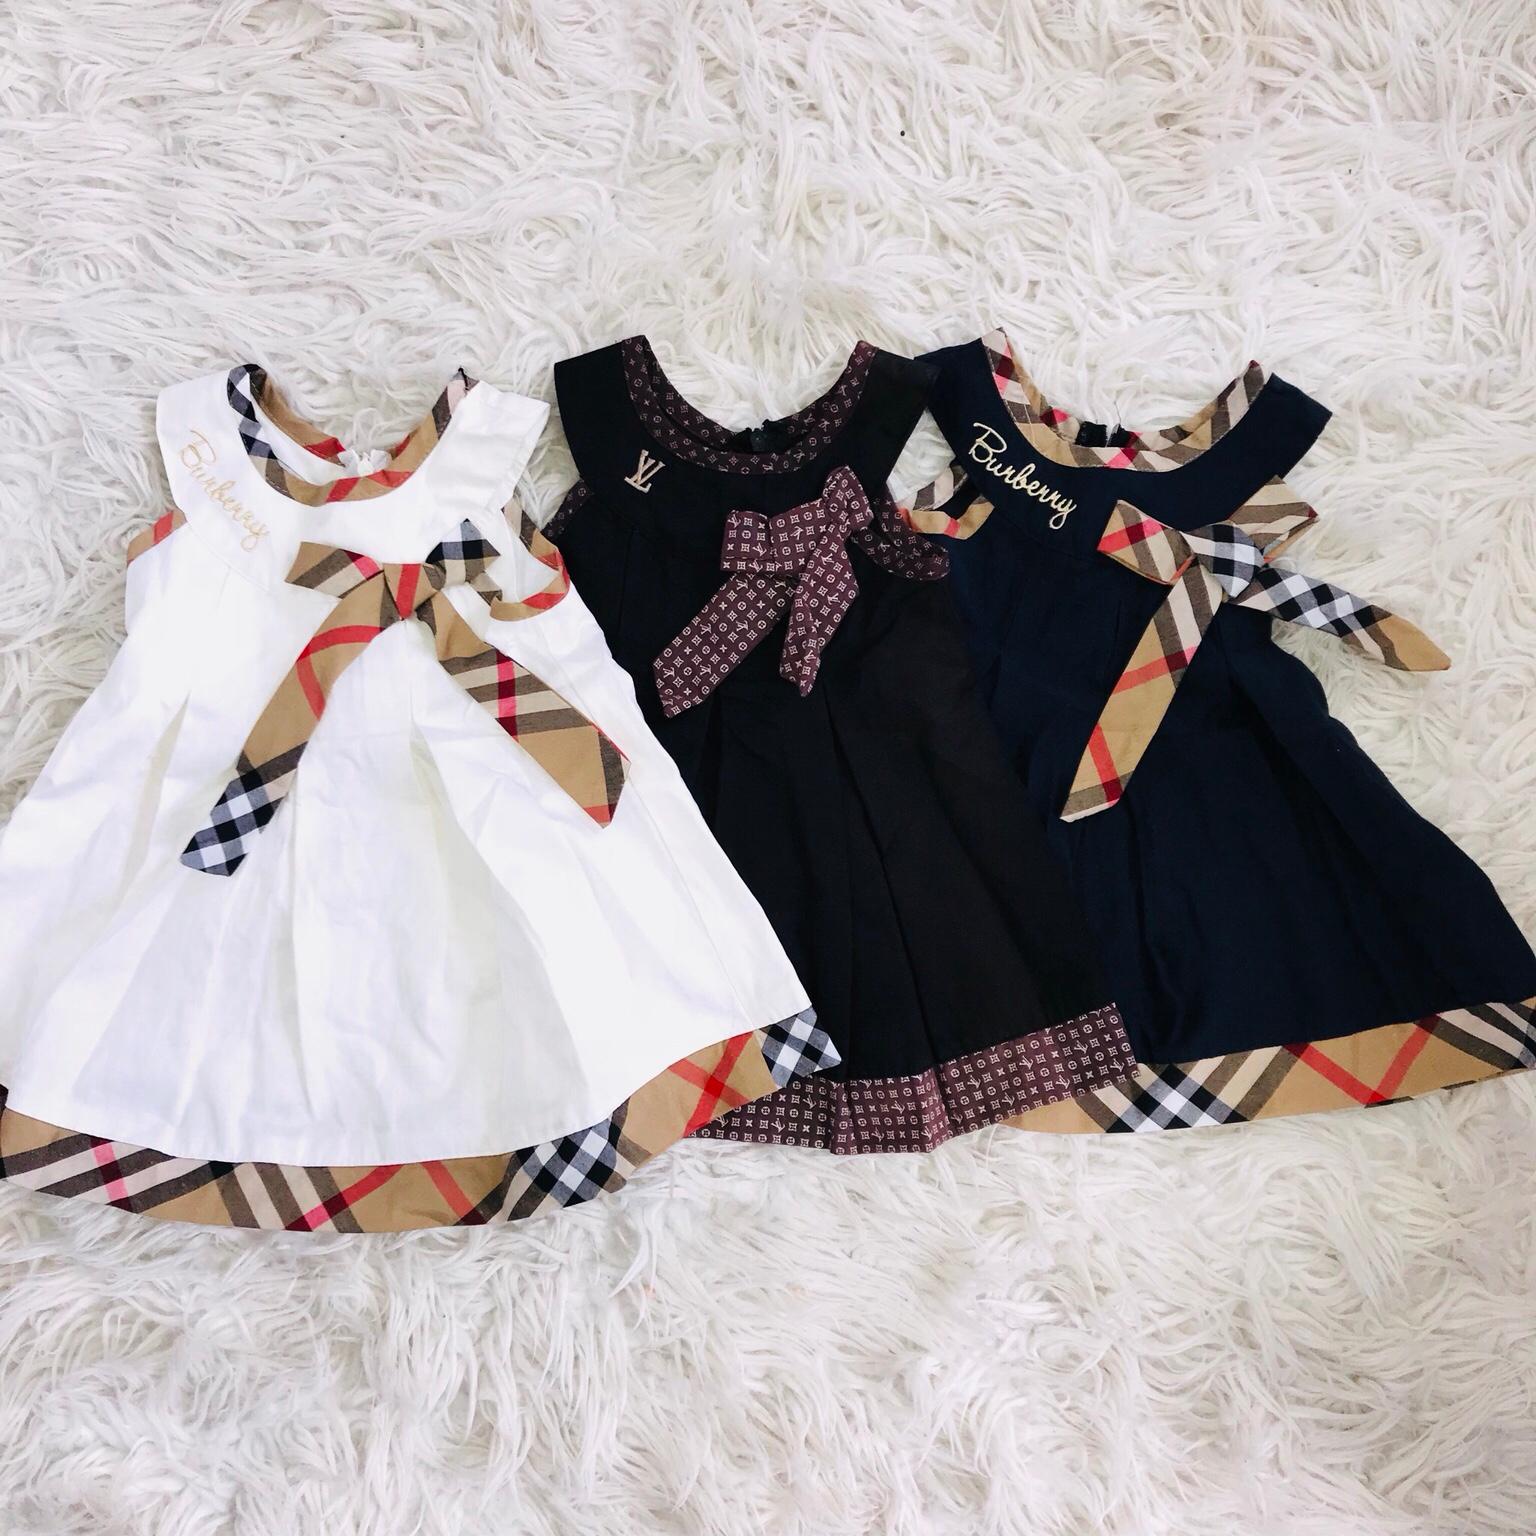 burberry dress for 1 year old